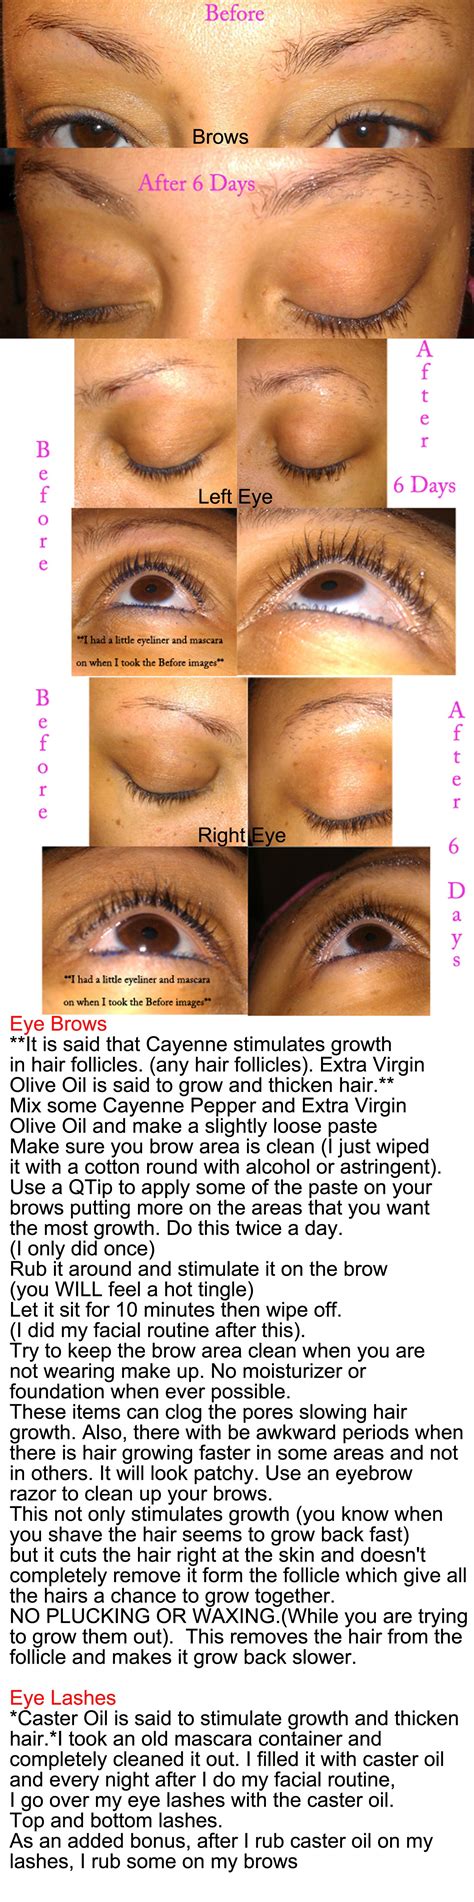 make you lashes longer thicker and your eye brows thicker it is said